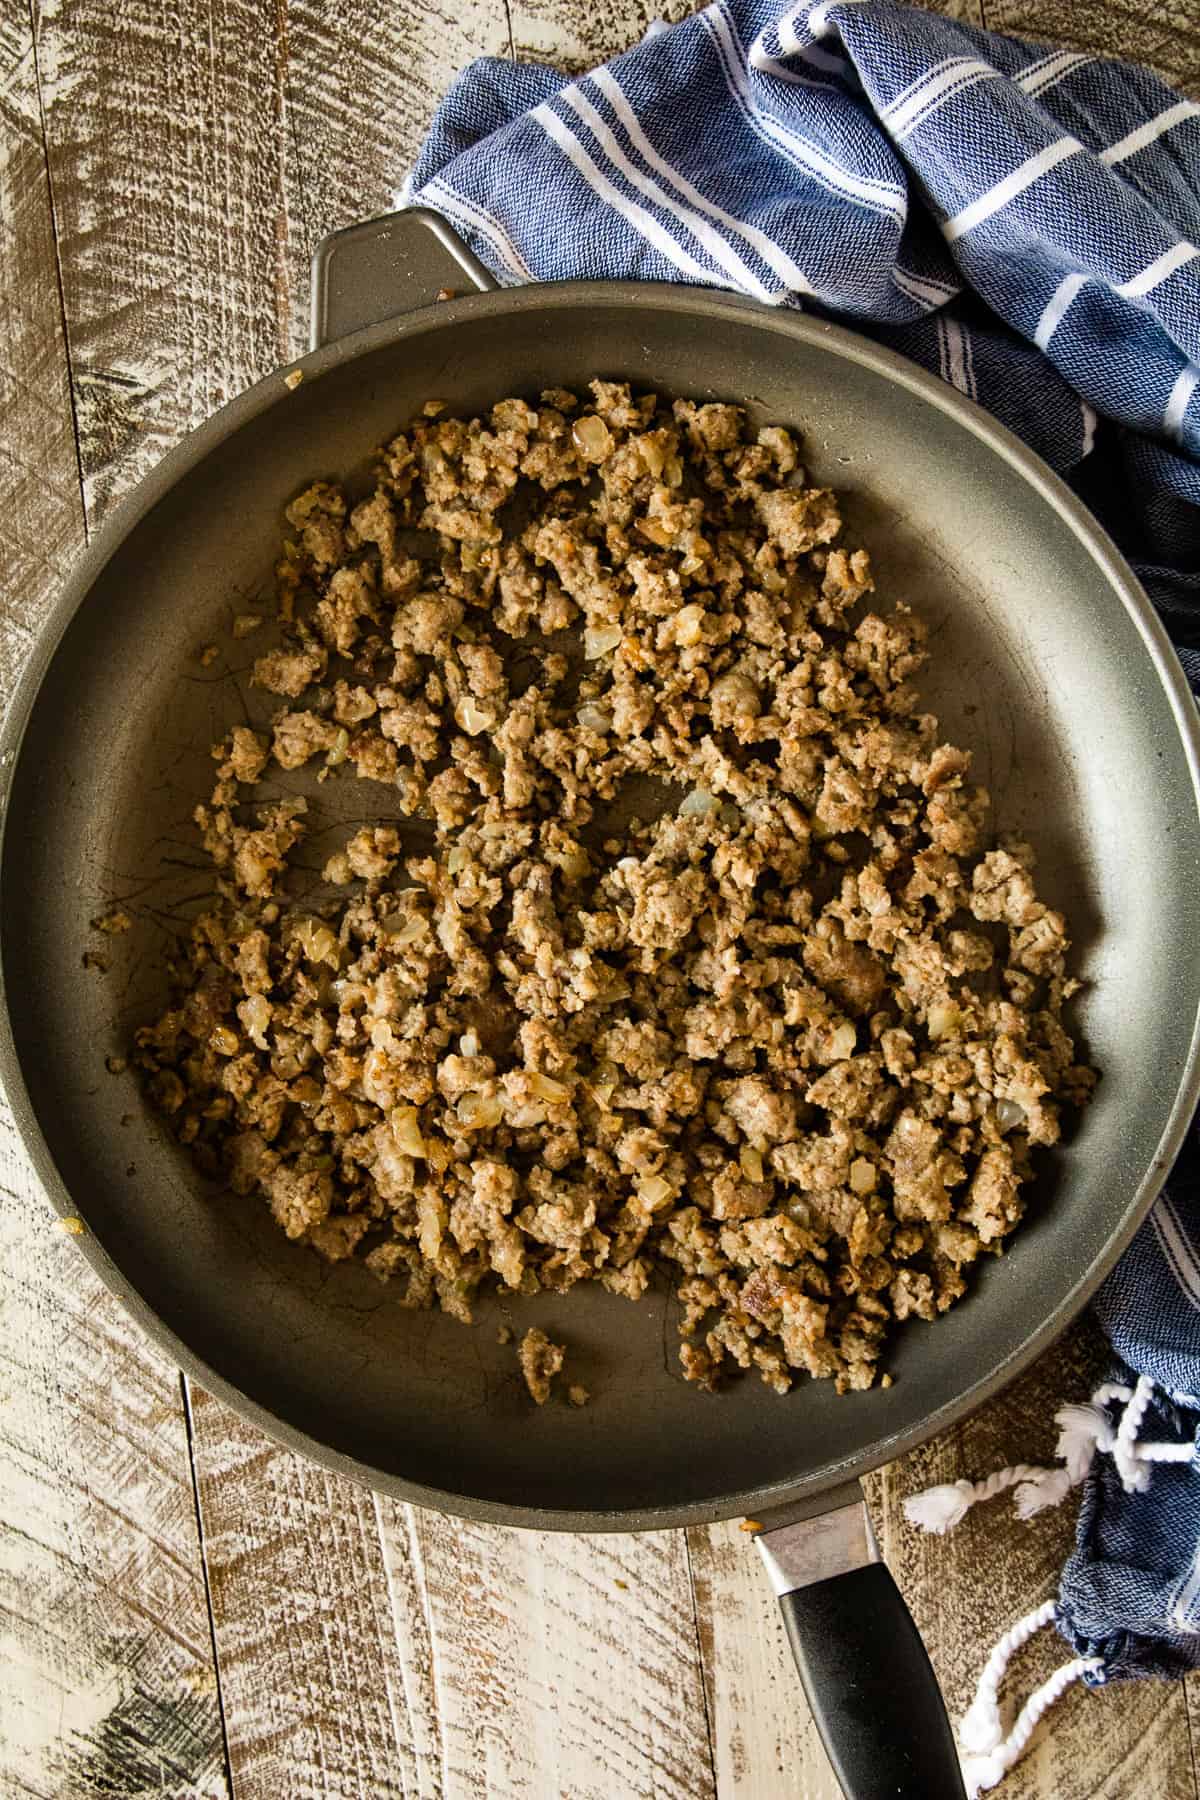 Cooked ground sausage in skillet.